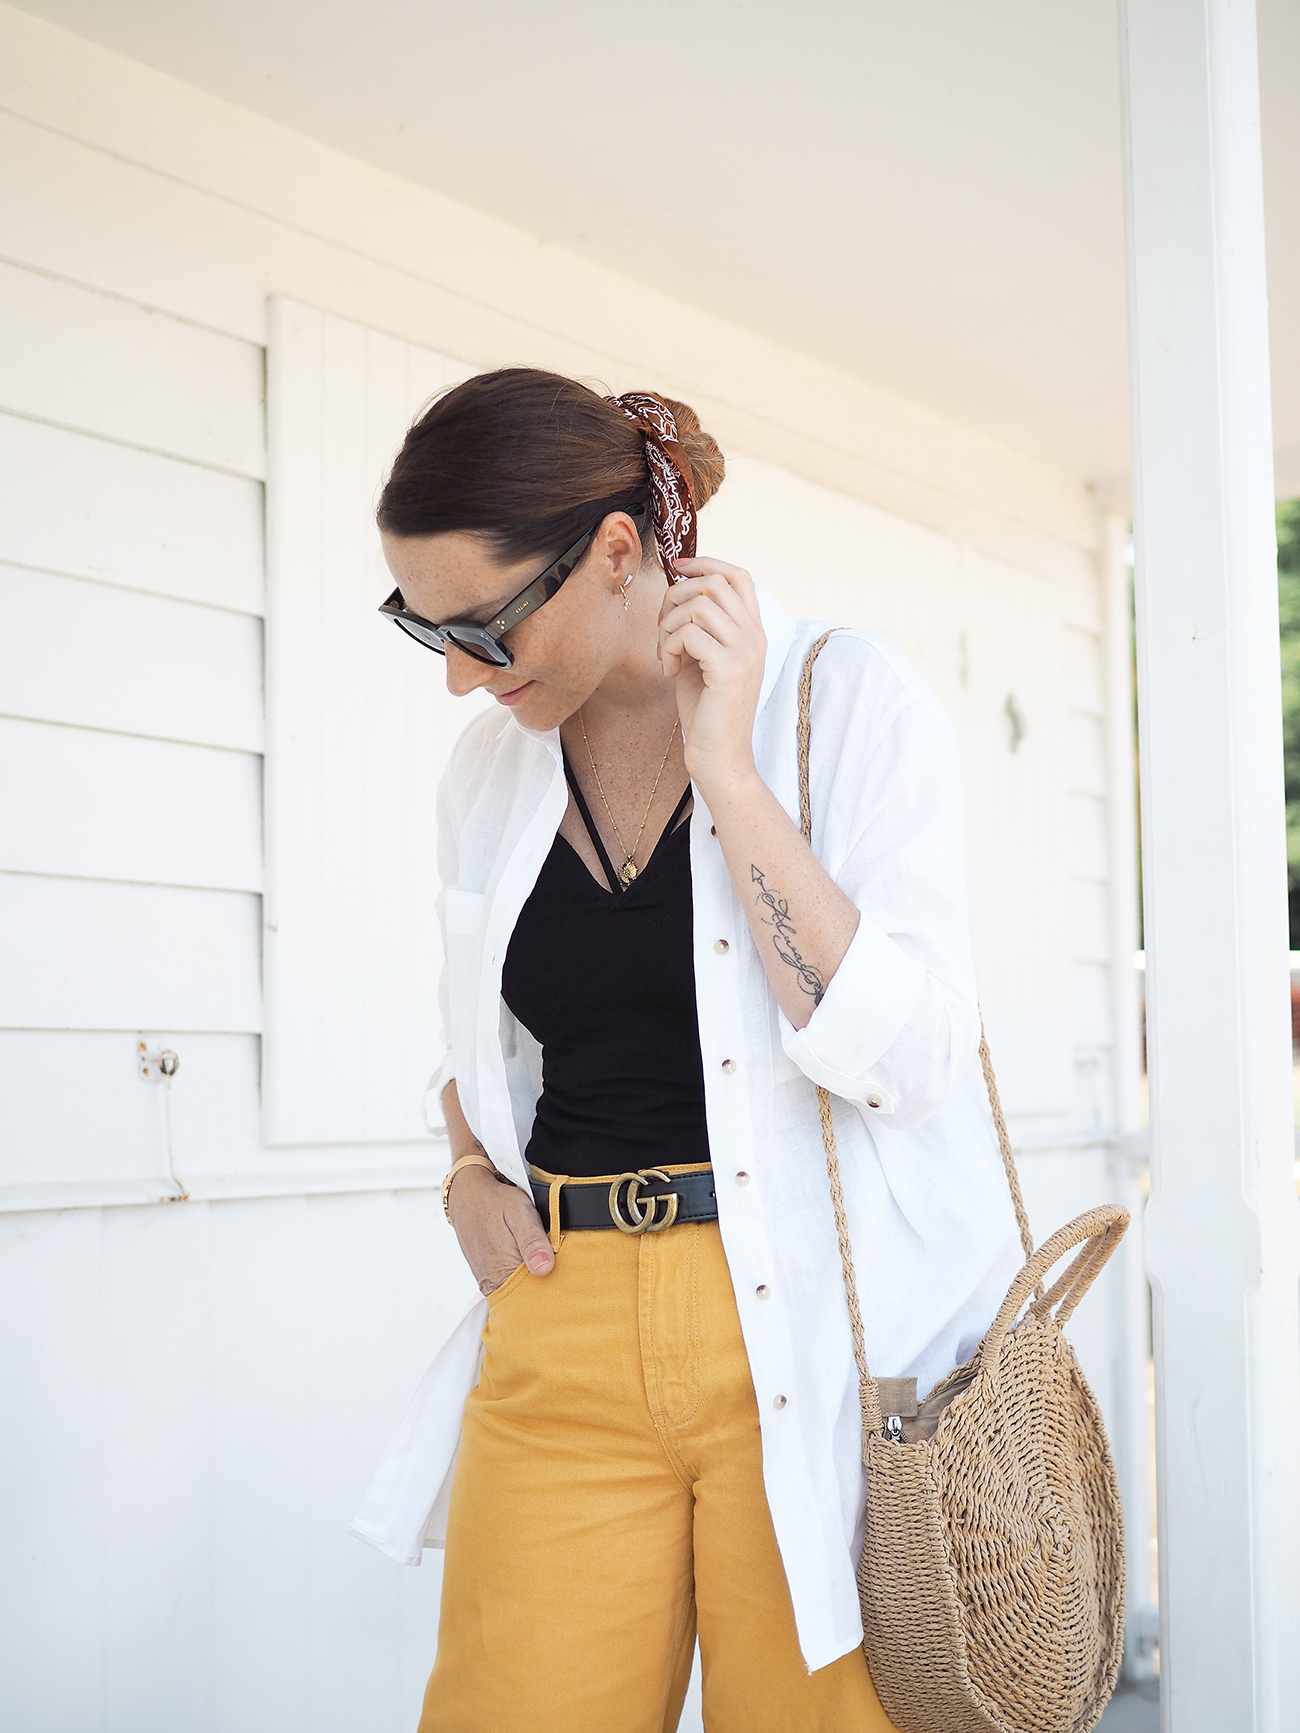 primark linen shirt and mustard jeans outfit